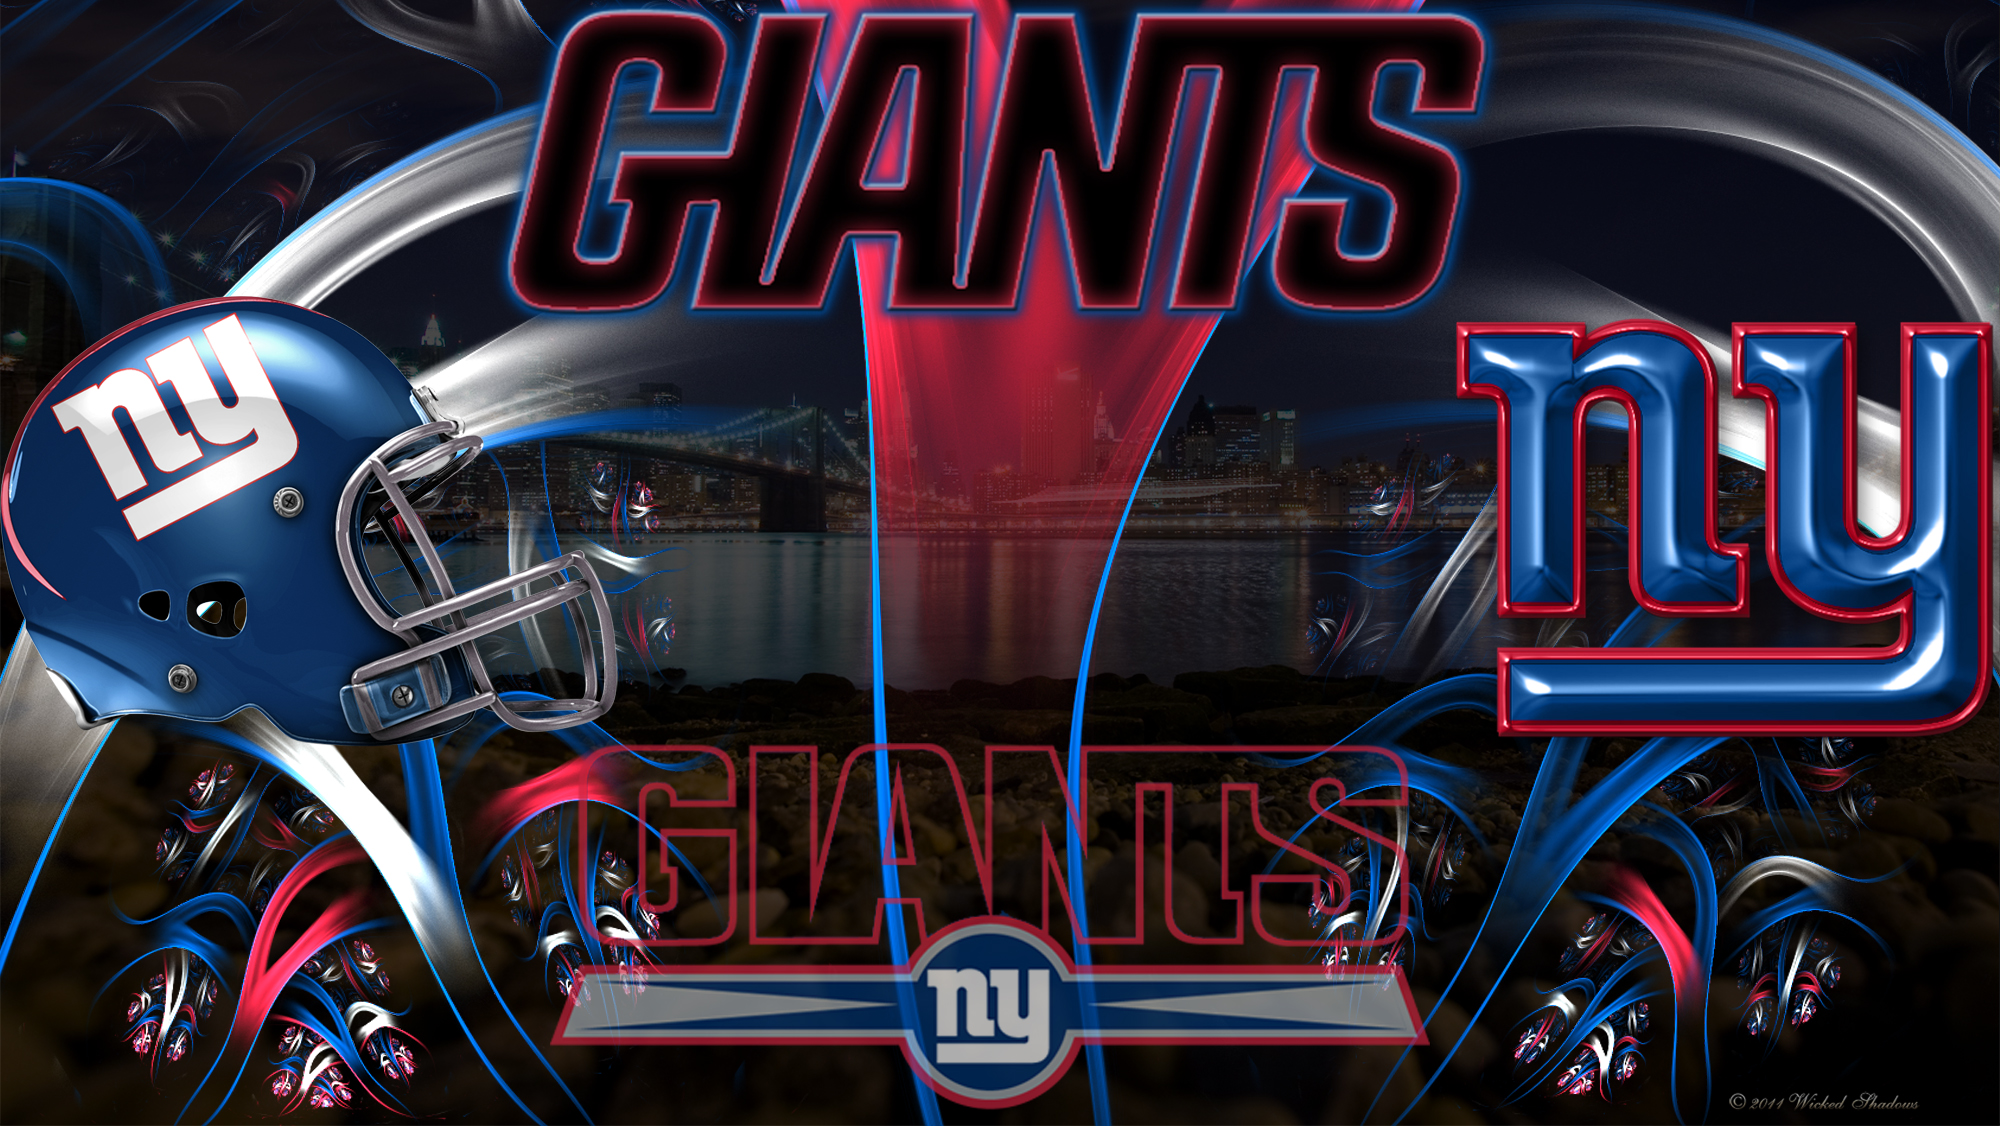 Wallpaper By Wicked Shadows New York Giants